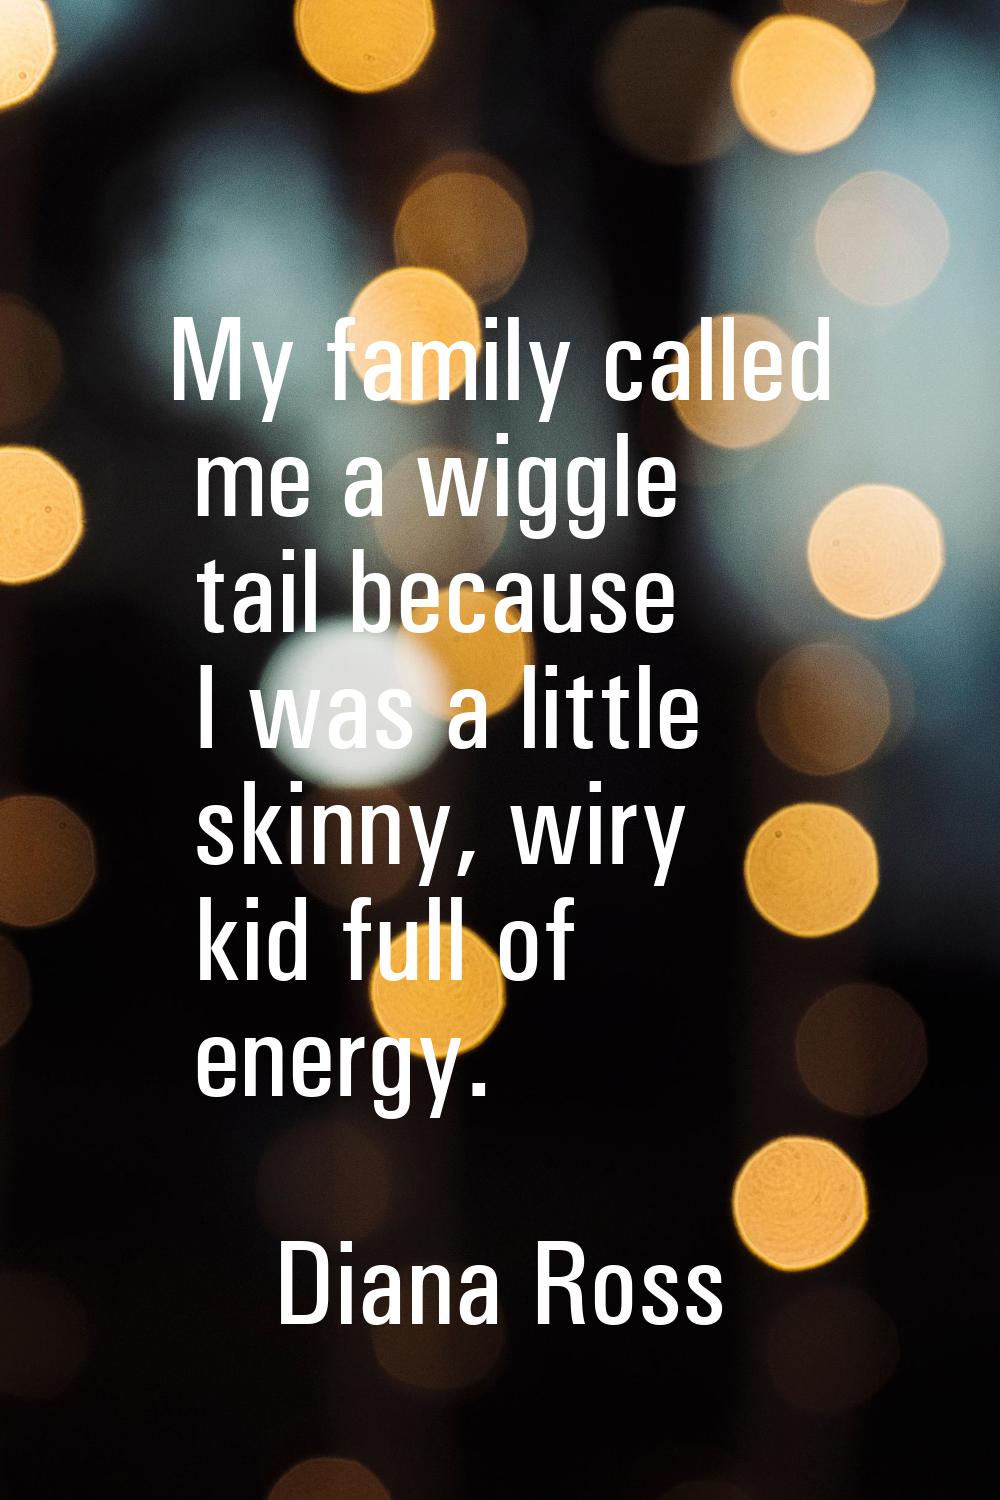 My family called me a wiggle tail because I was a little skinny, wiry kid full of energy.